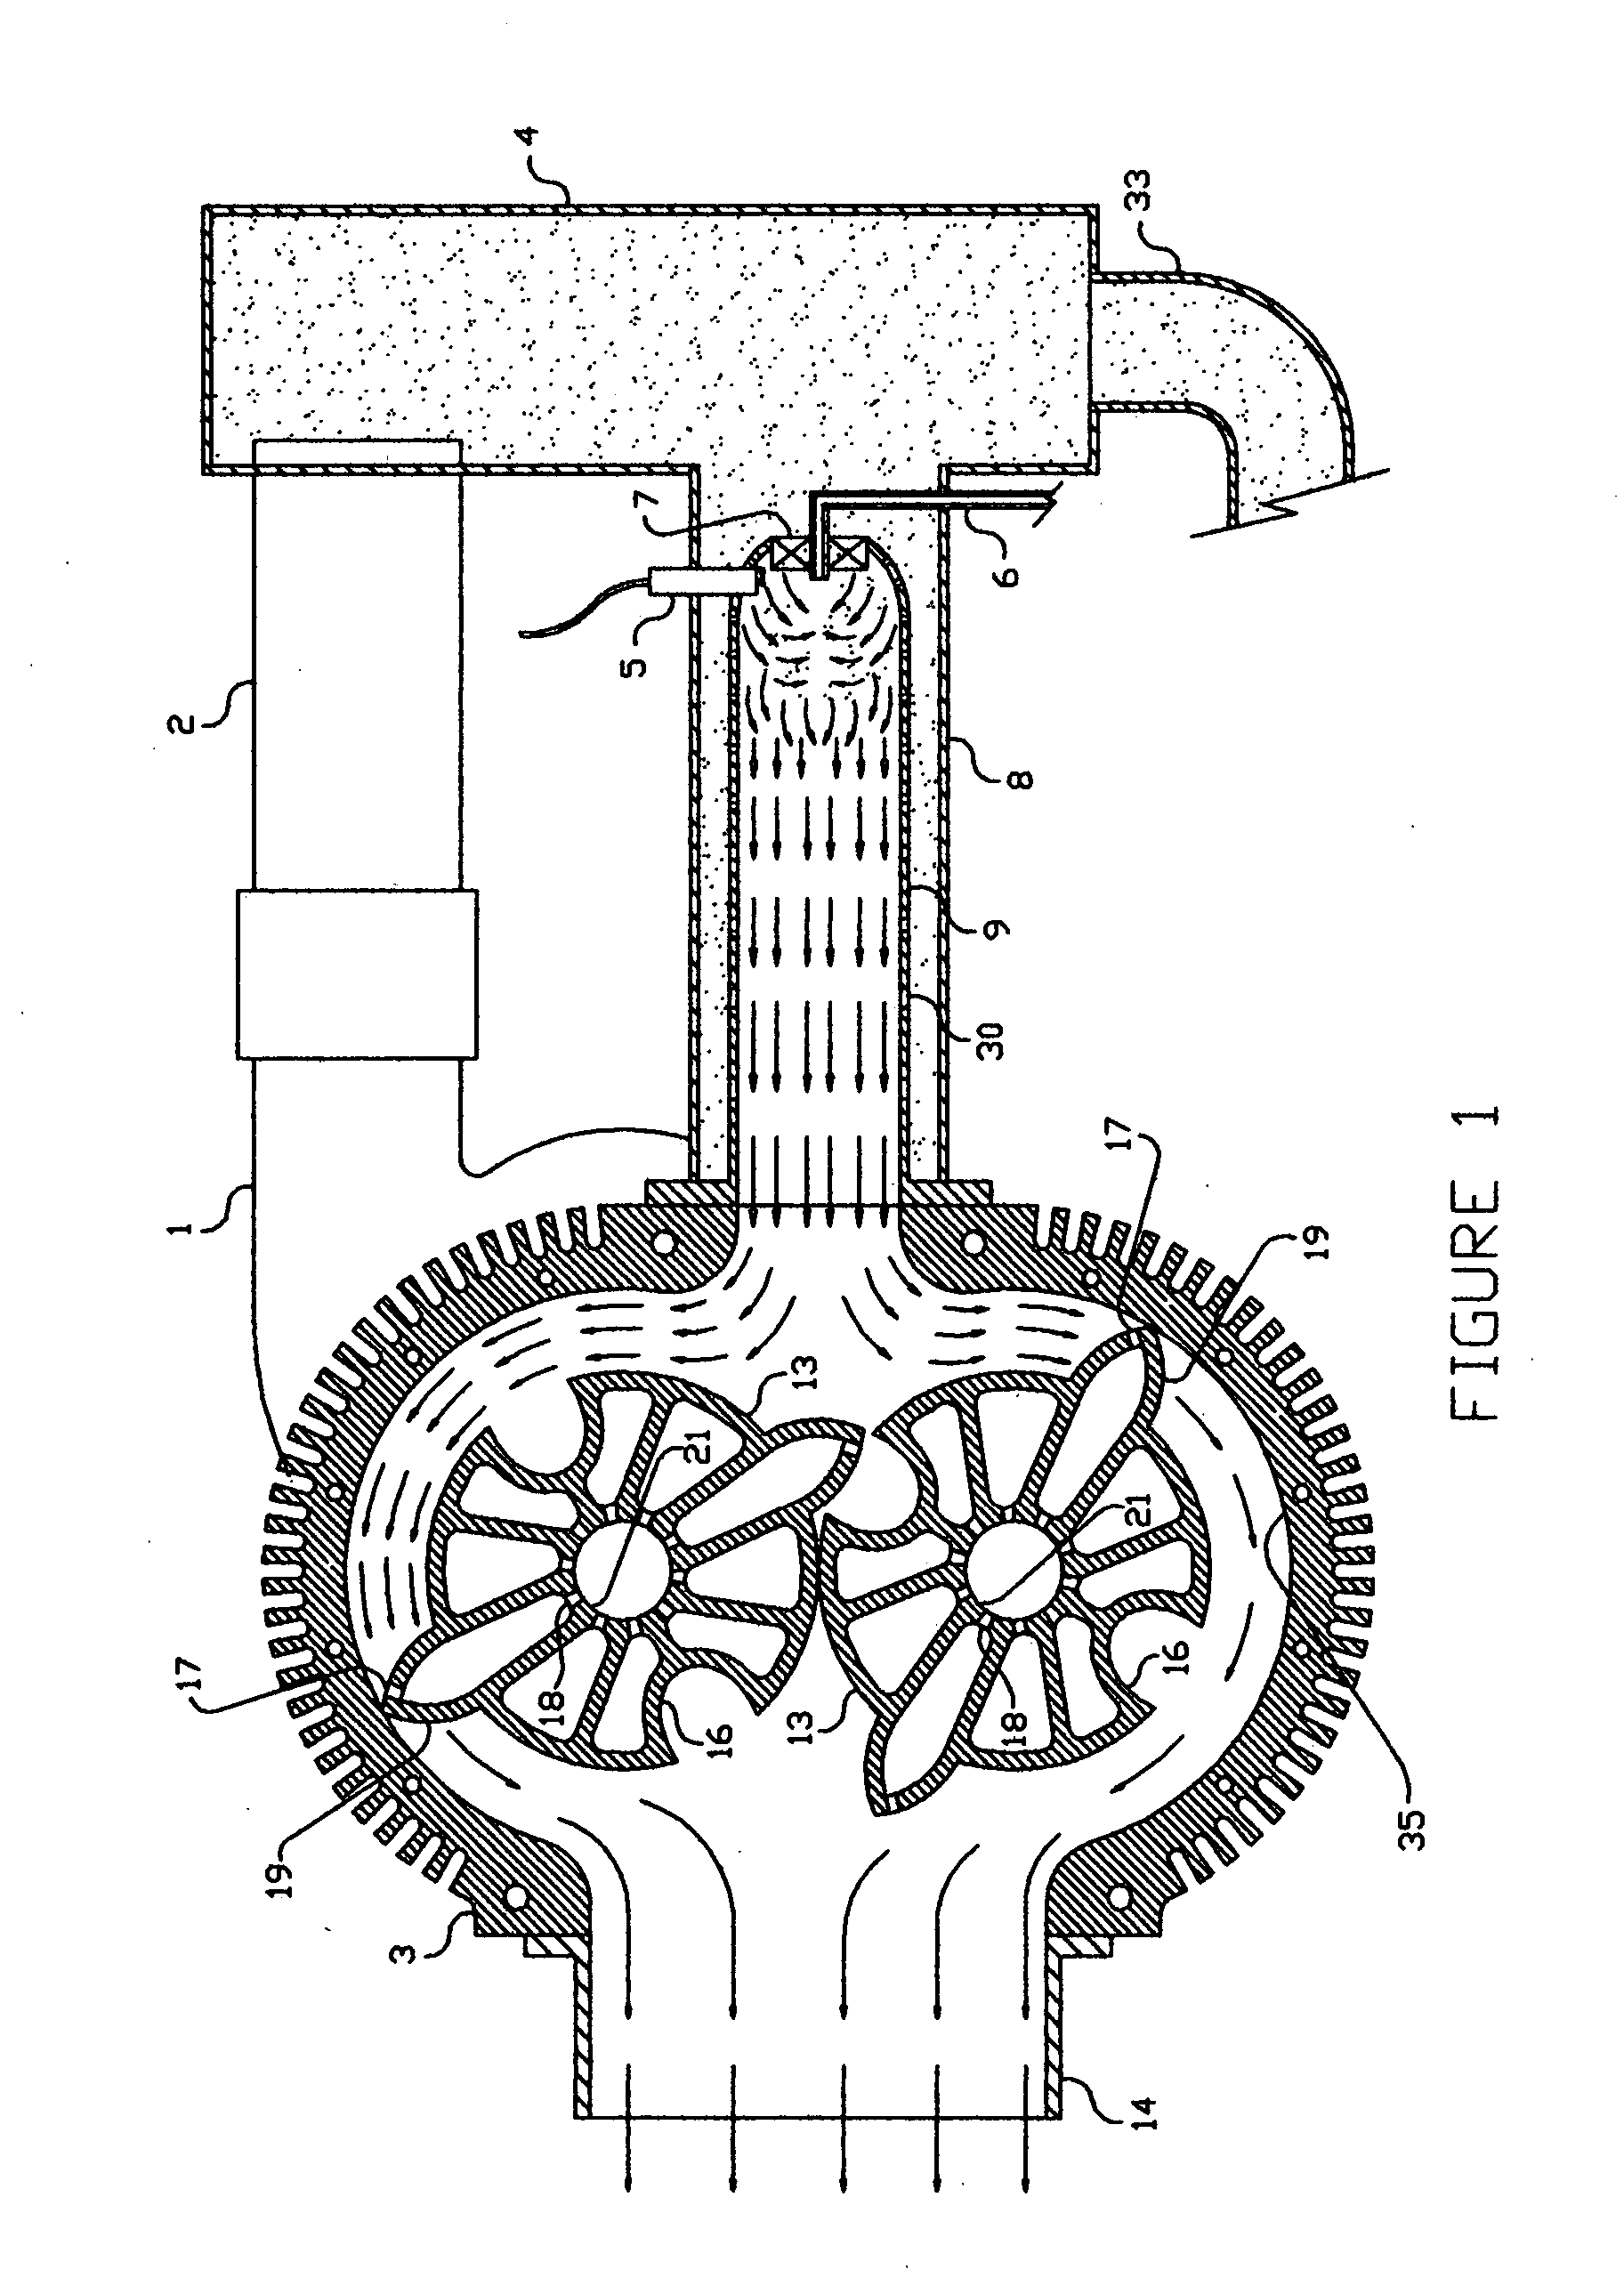 Open-cycle internal combustion engine